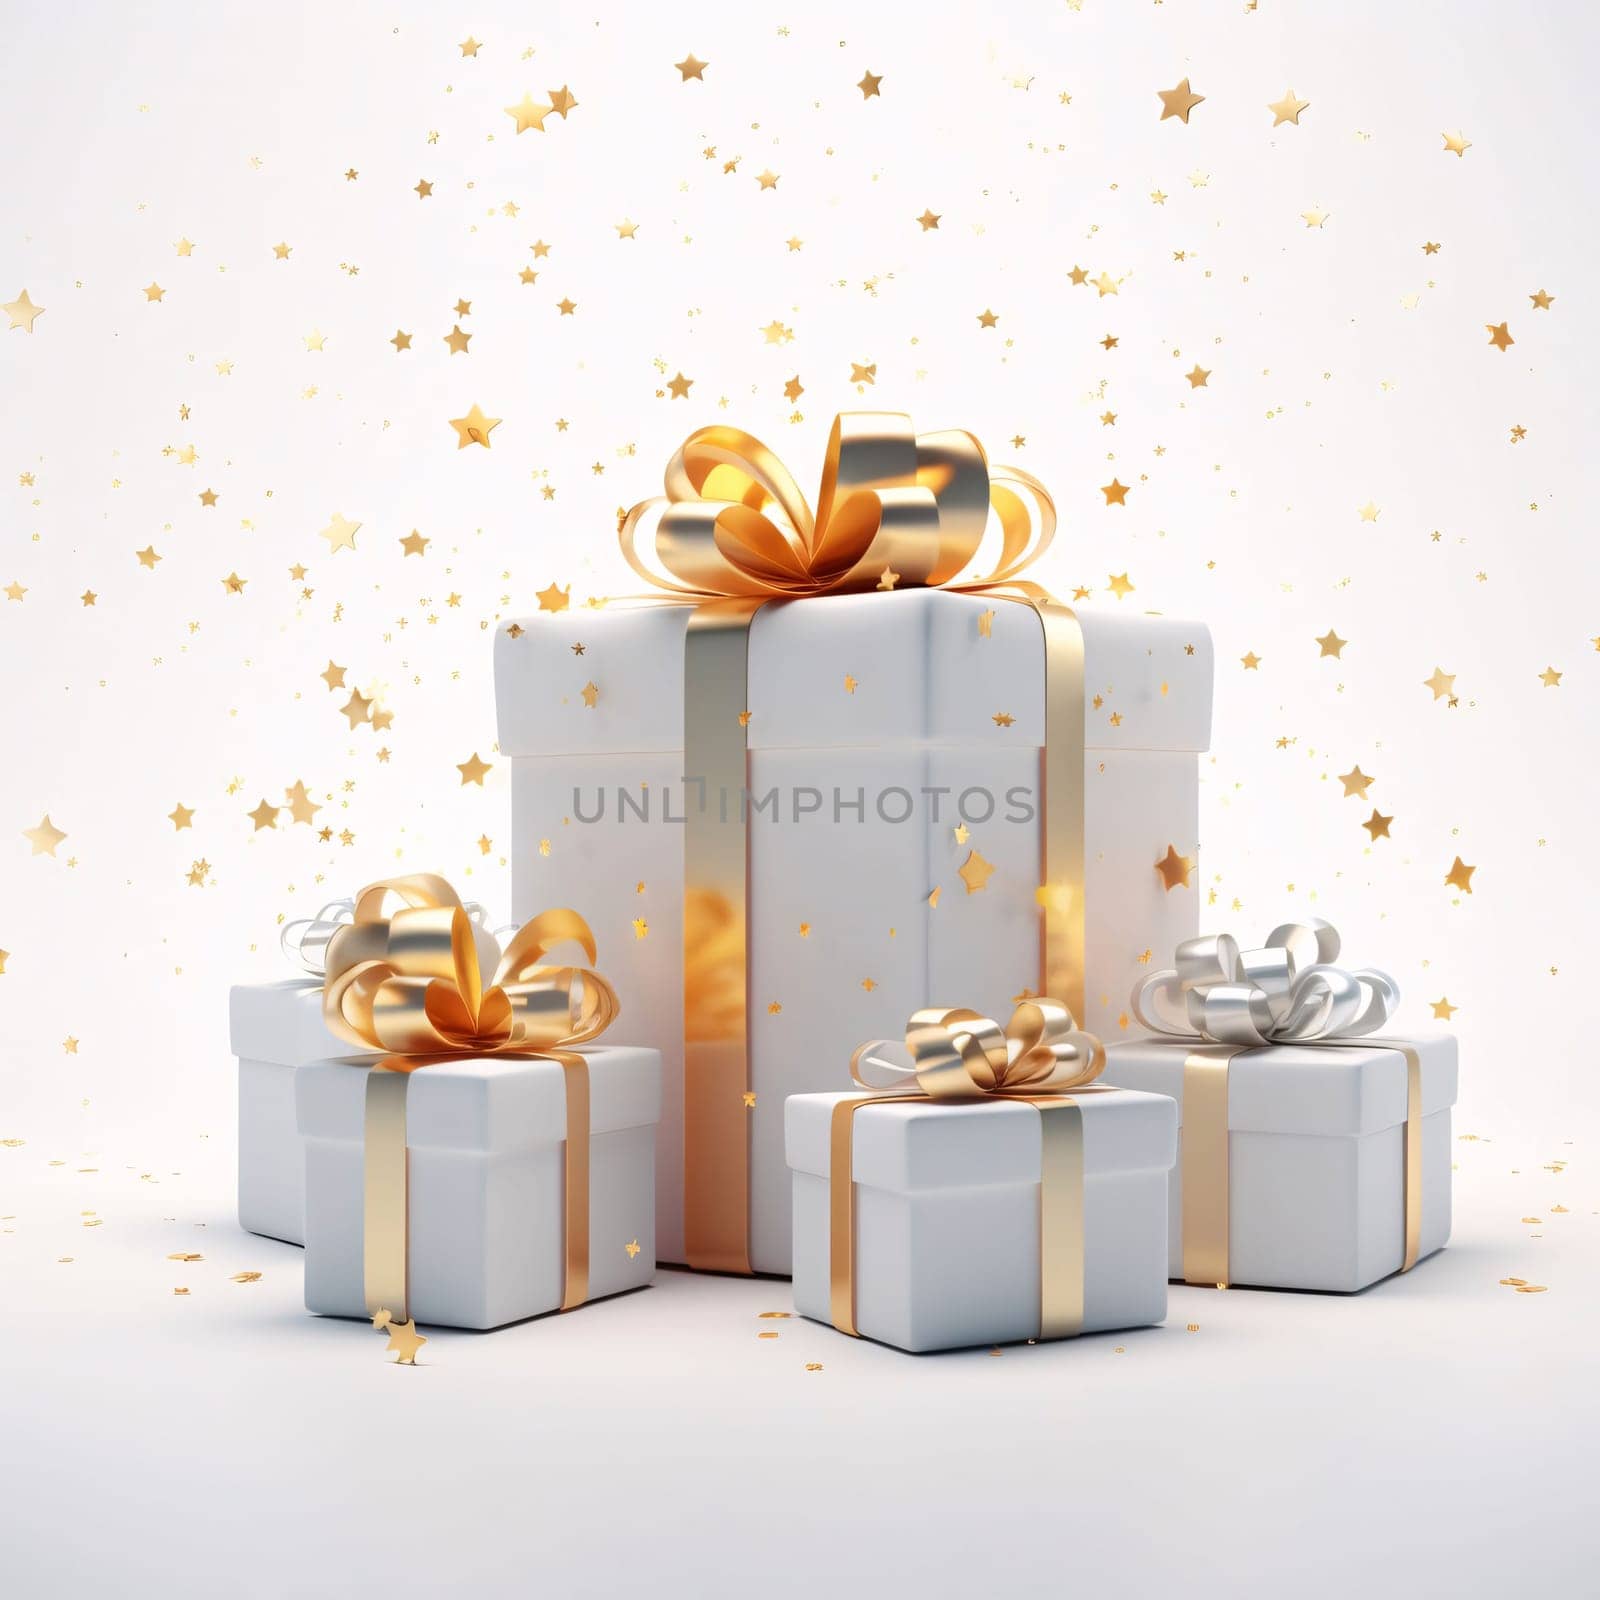 White gifts with gold bows around confetti star white background. Gifts as a day symbol of present and love. A time of falling in love and love.